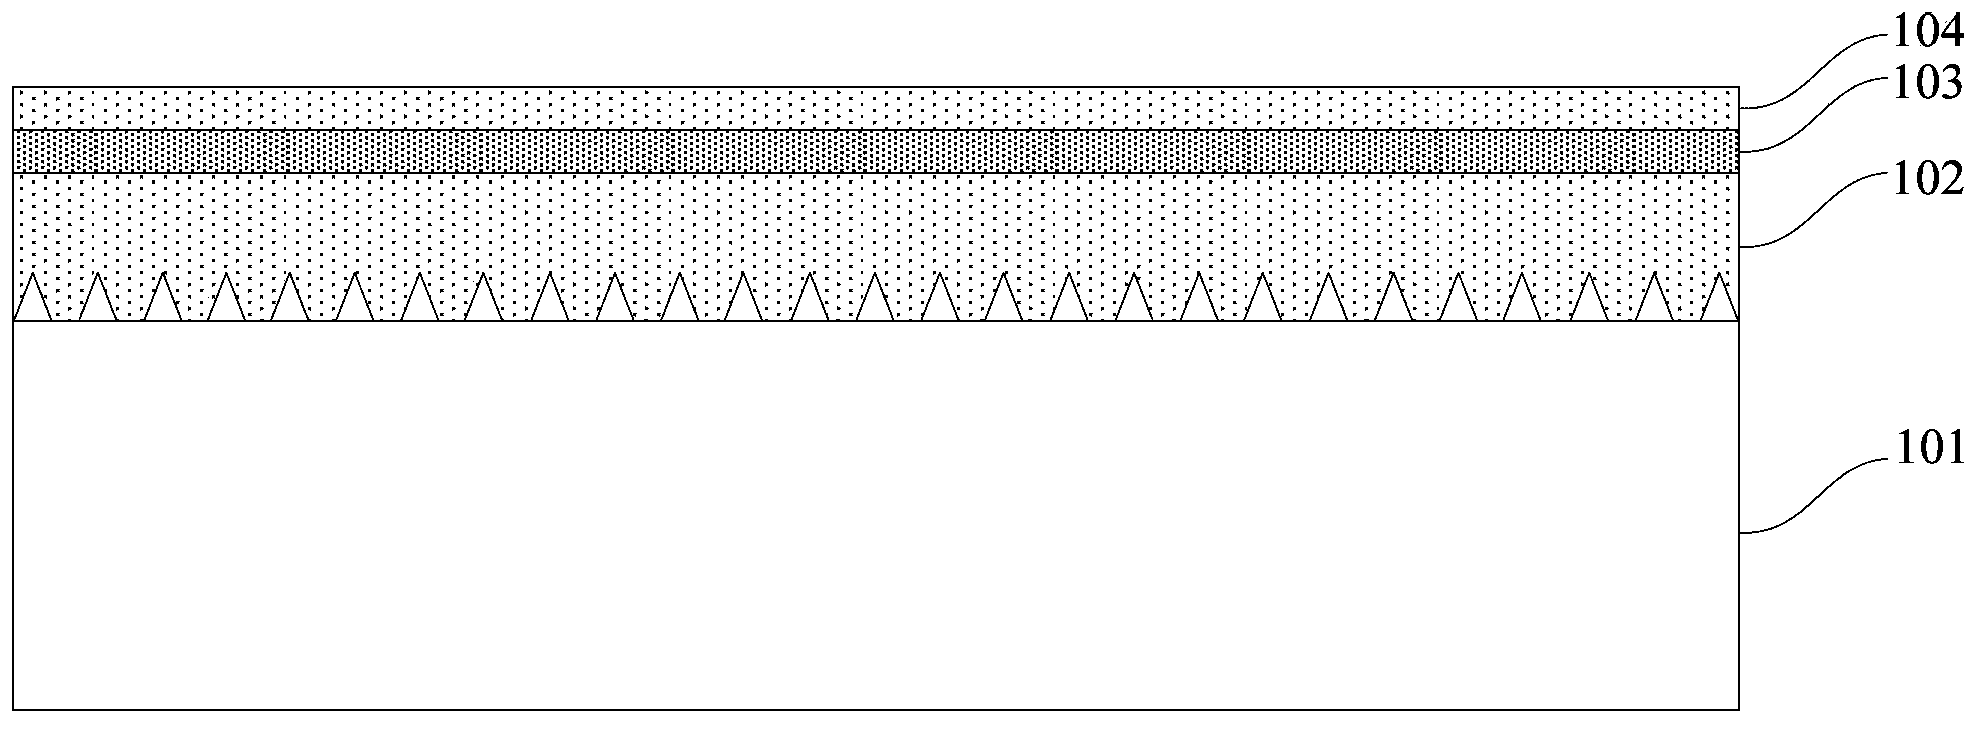 Front cutting technology of light emitting diode